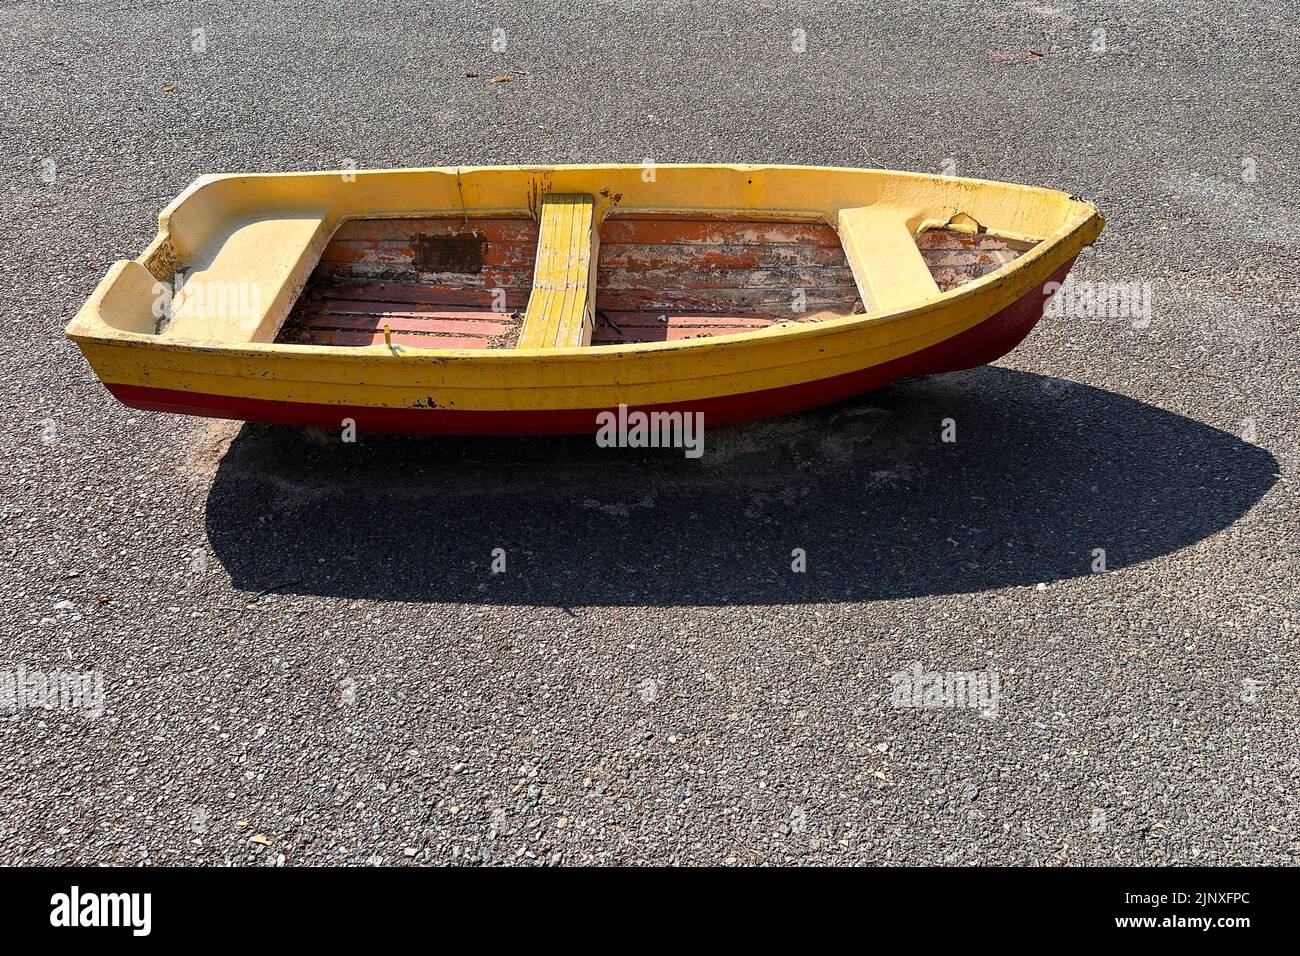 Small wooden boat parked on the street. Milan, Italy - August 2022 Stock Photo